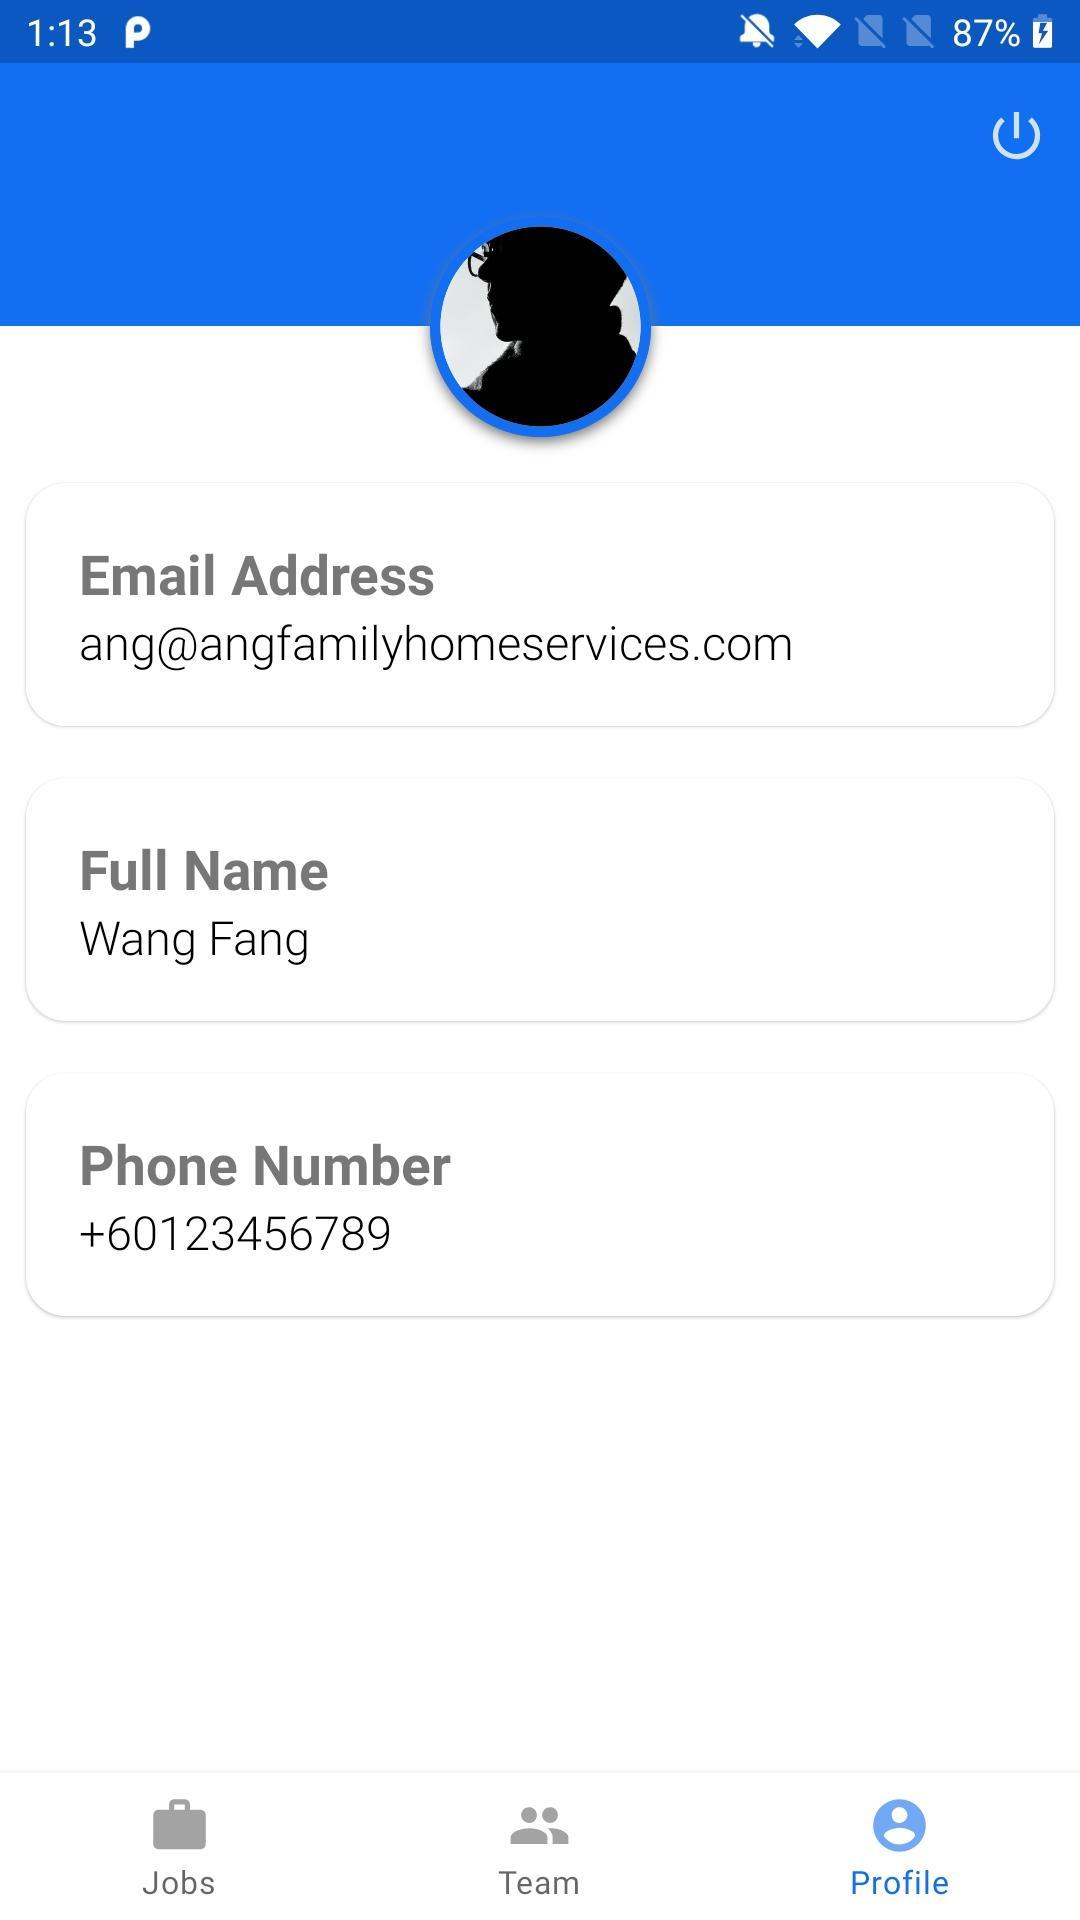 ANG Family Home Services - Crew 1.0.6 Screenshot 6